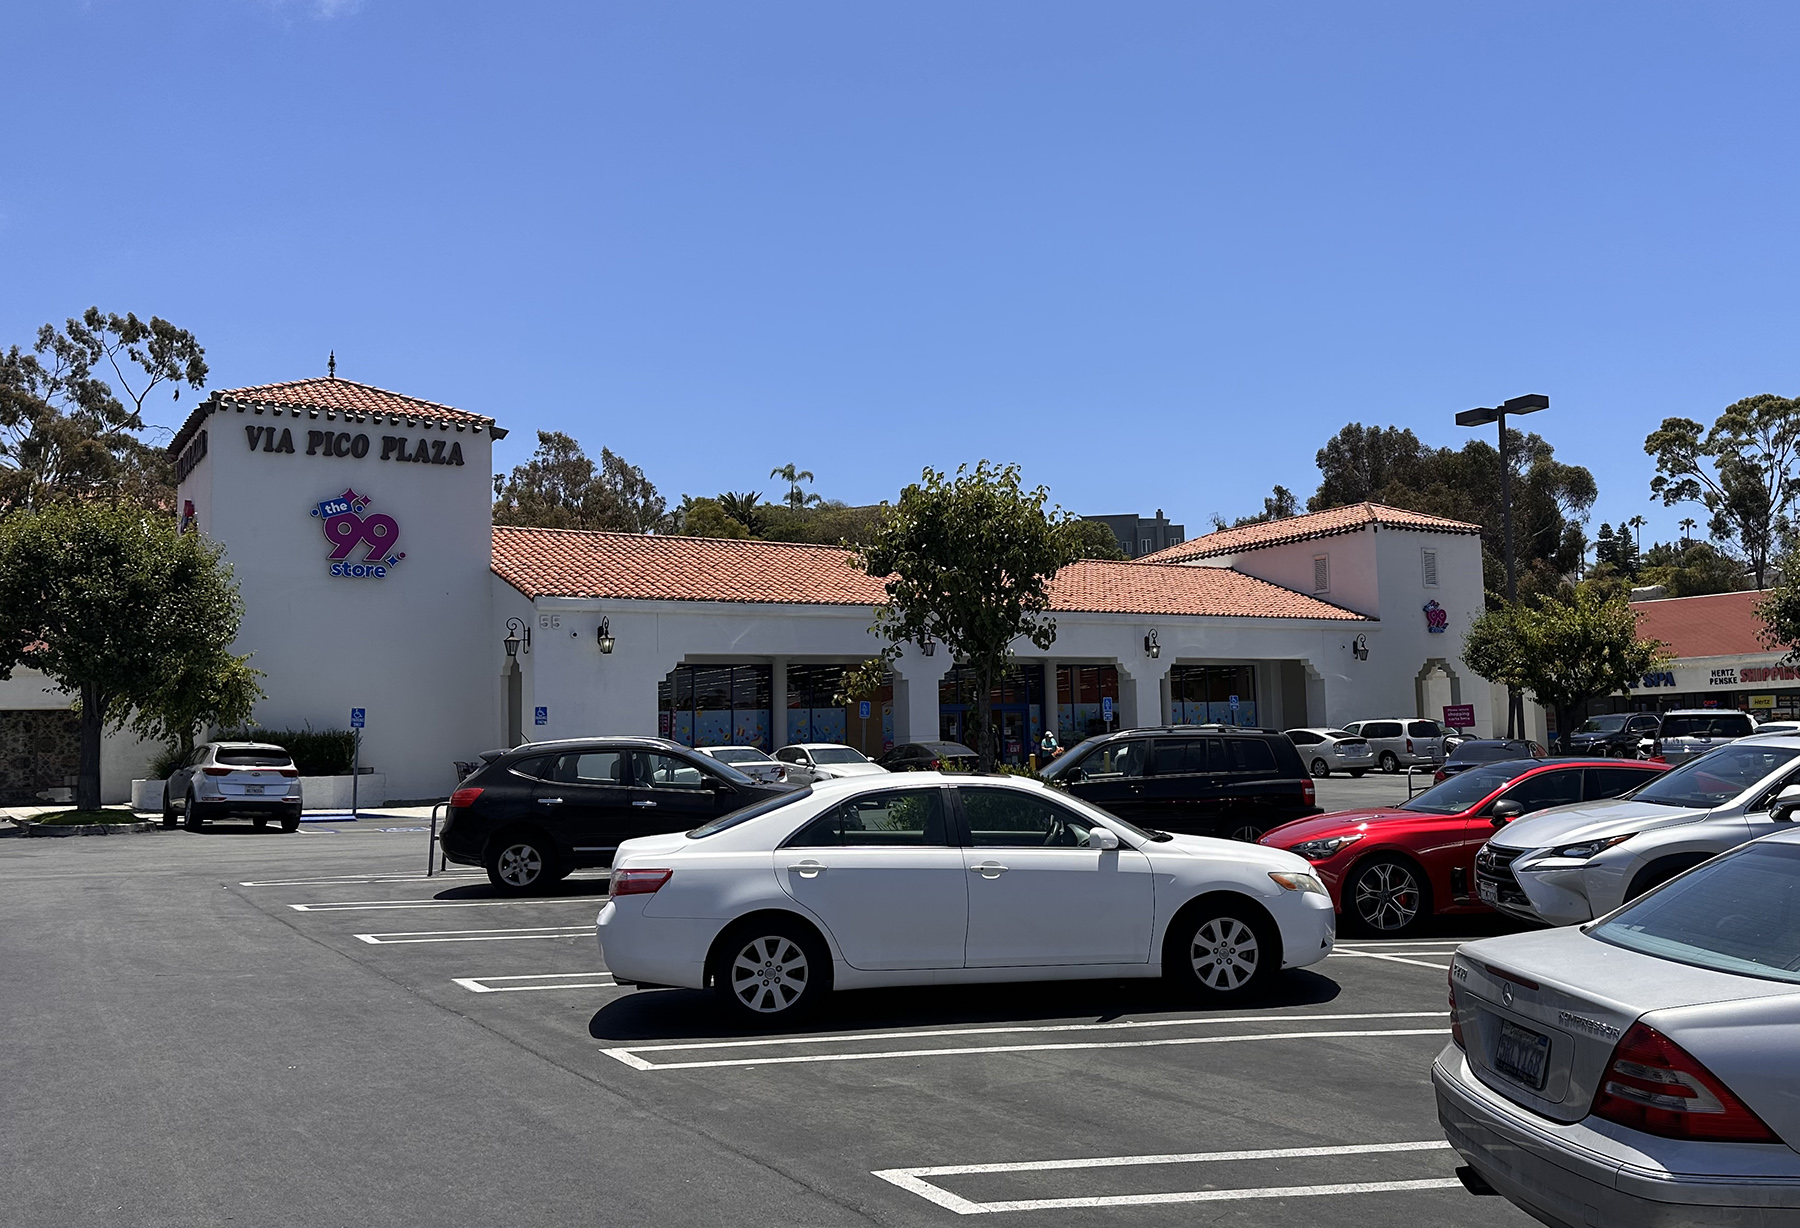 Wood Investments Companies Acquires 25,500 SF Retail Building Occupied by The 99 Store in San Clemente, Calif., for $6.95 Million